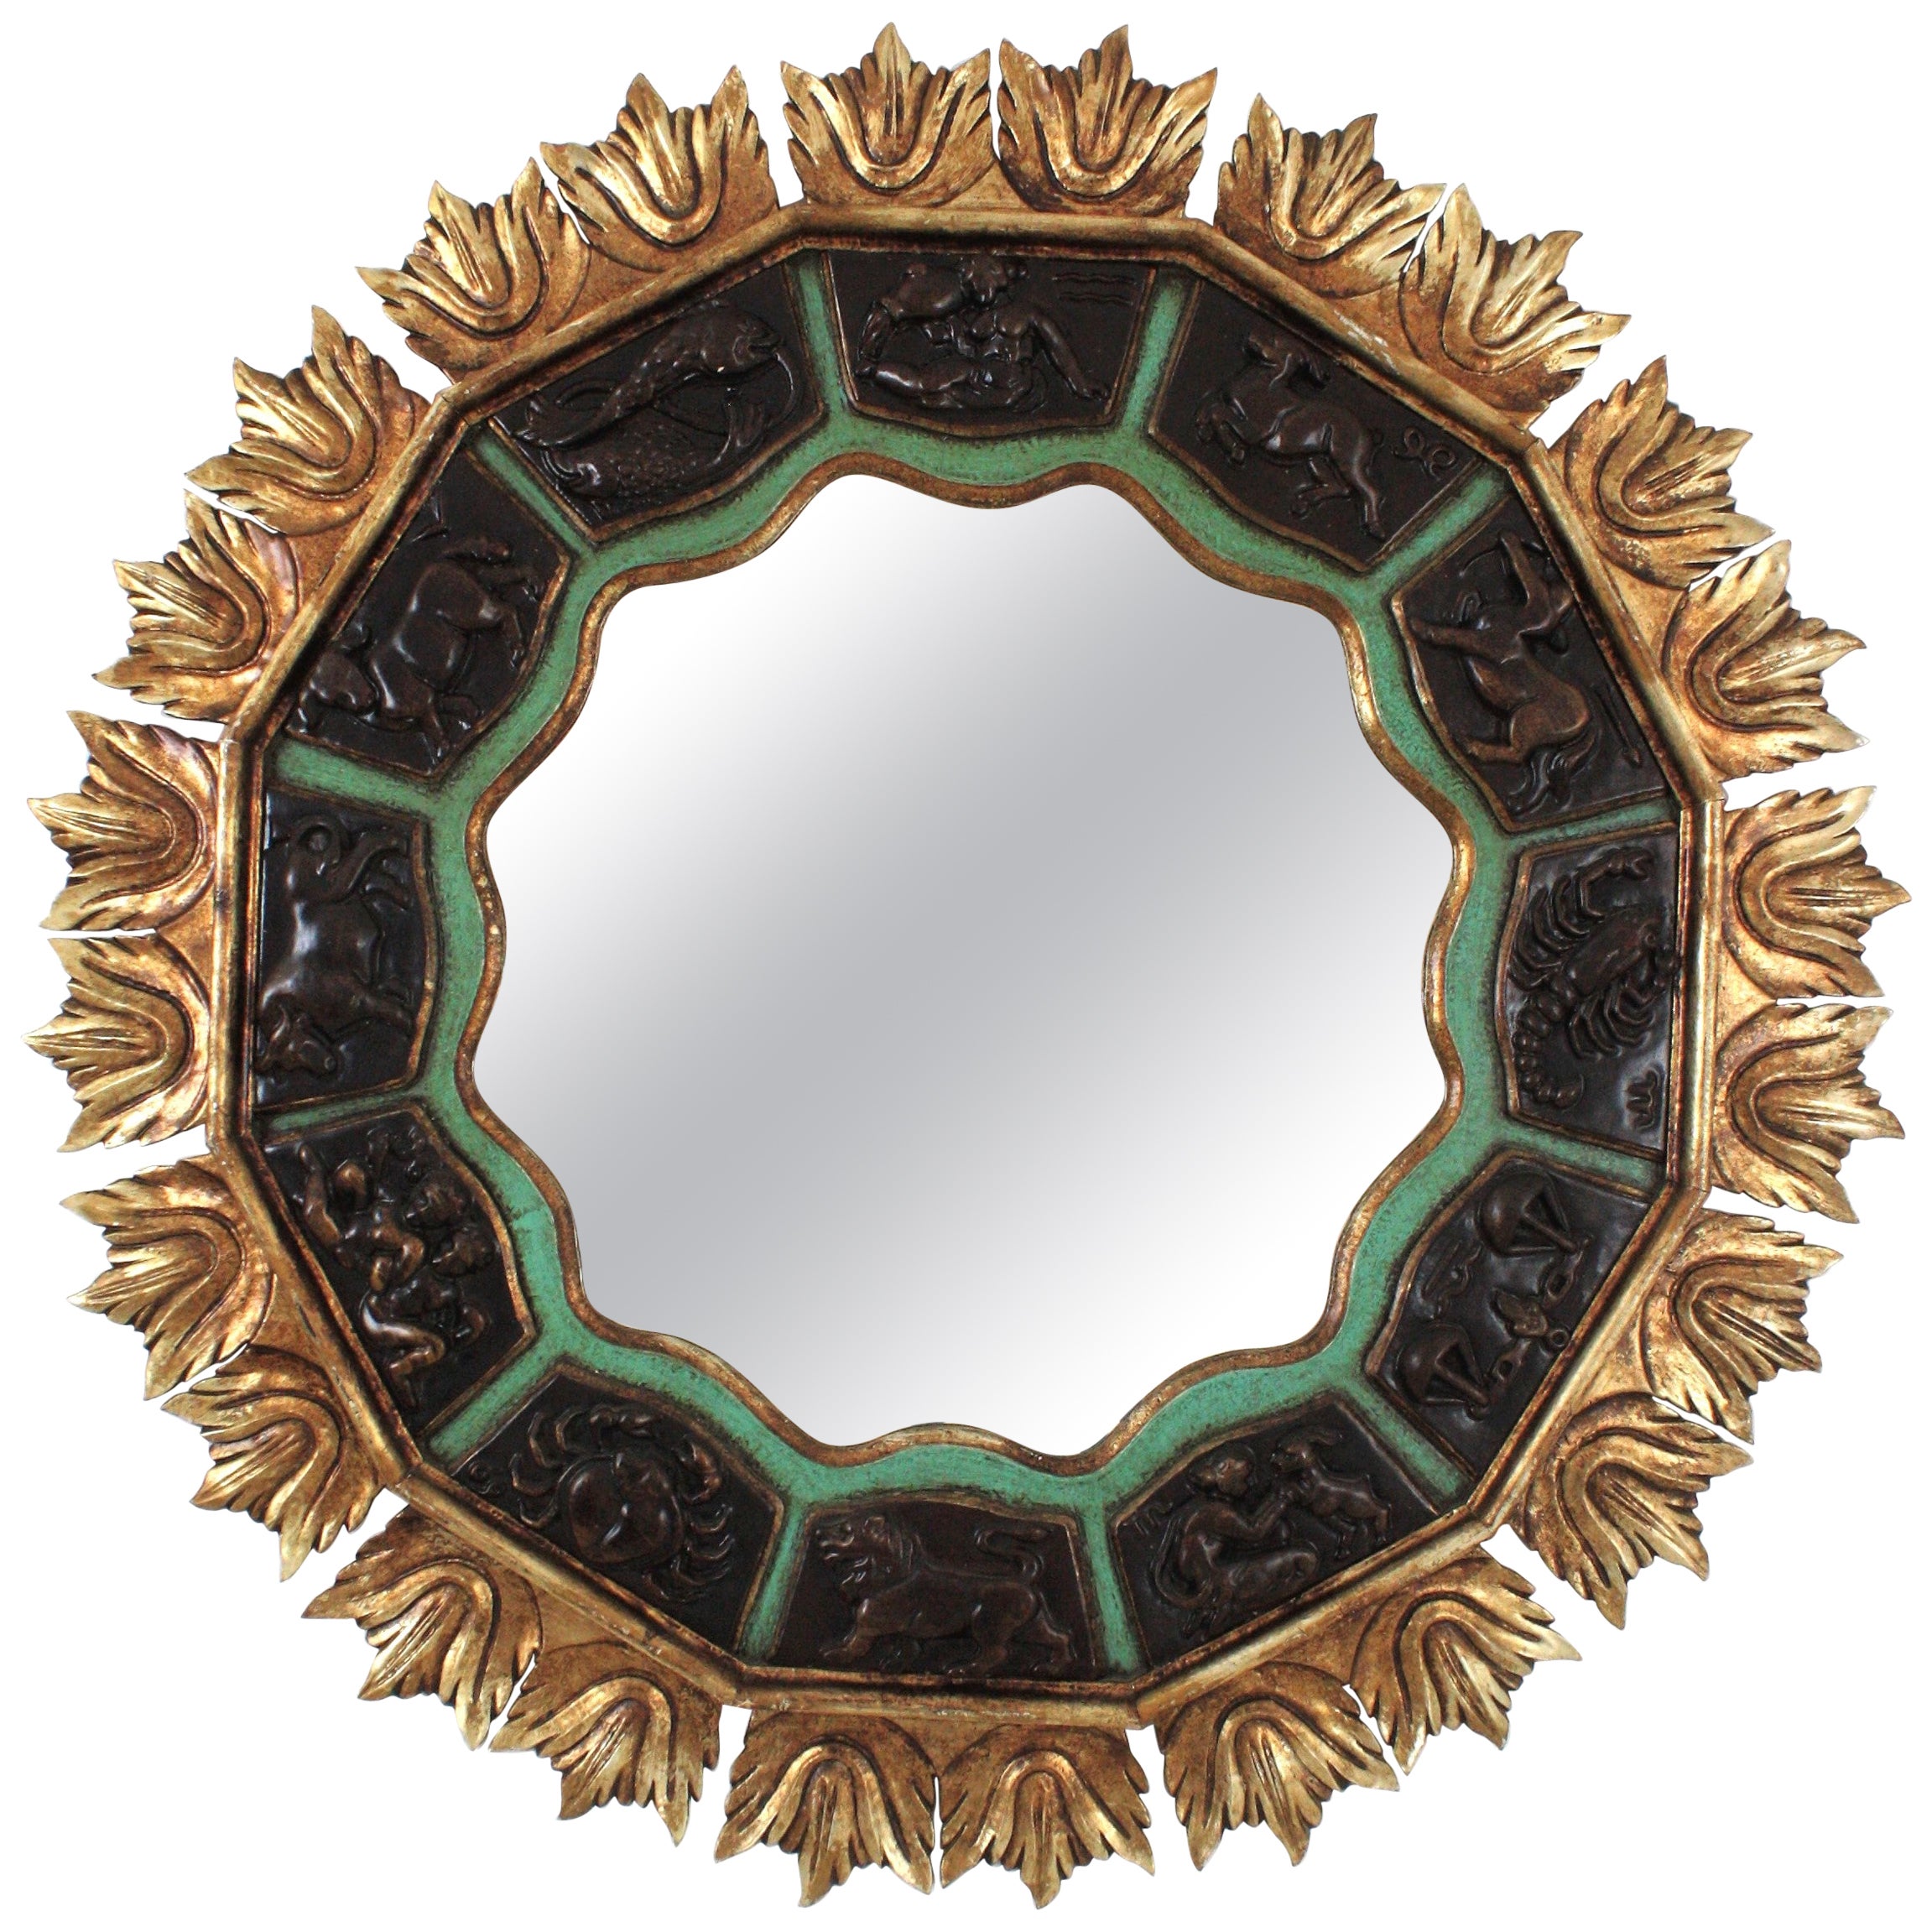 Sunburst Zodiac Mirror with Carved Giltwood & Green Frame, 1950s For Sale